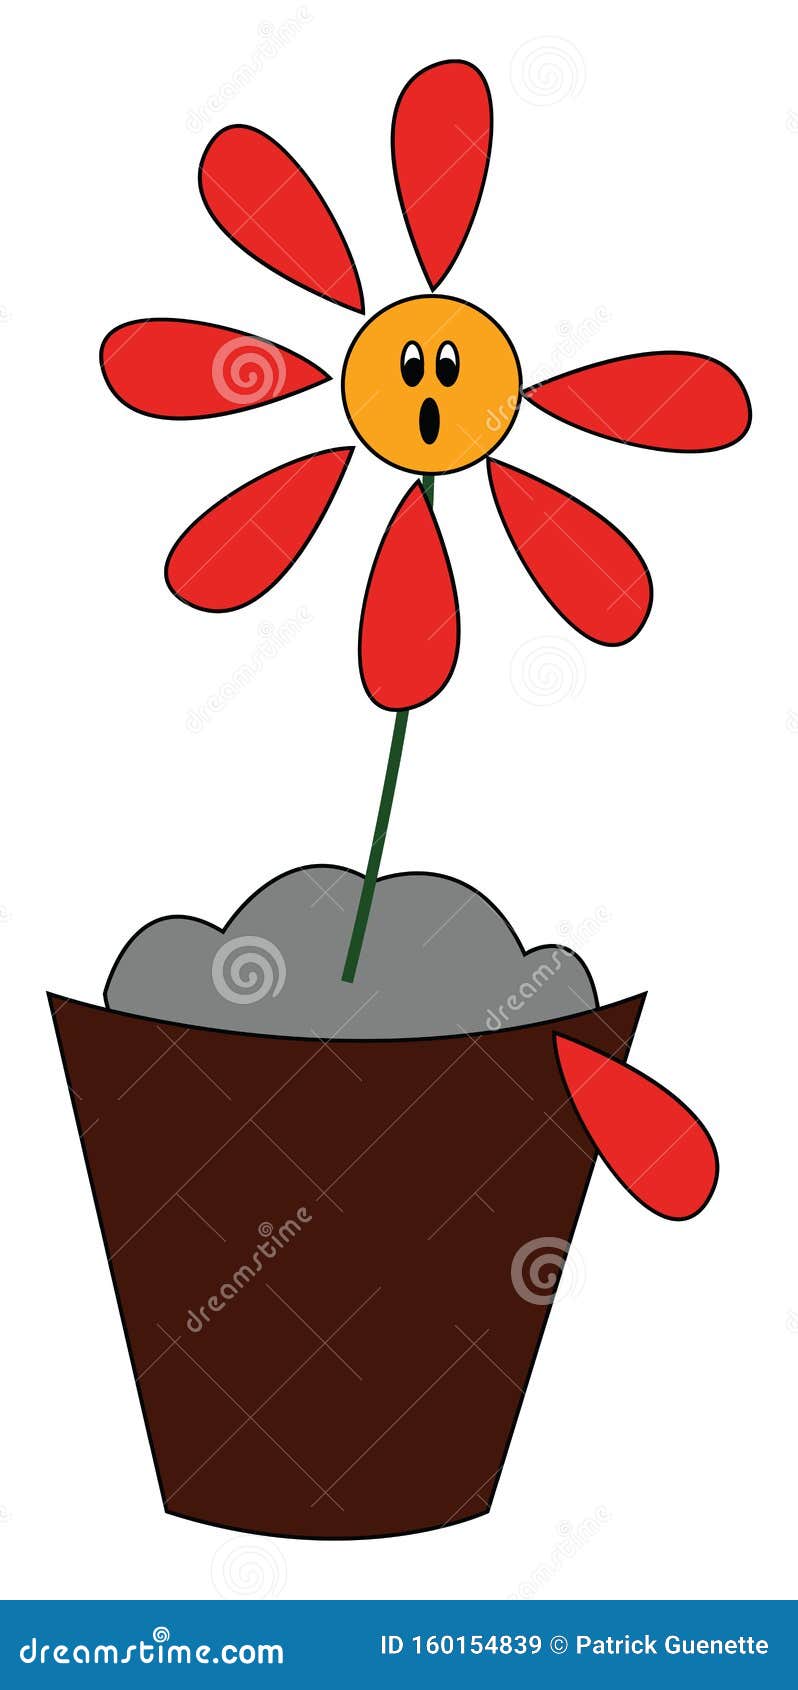 Flower Losing His Red Petals Stock Vector - Illustration of plant ...